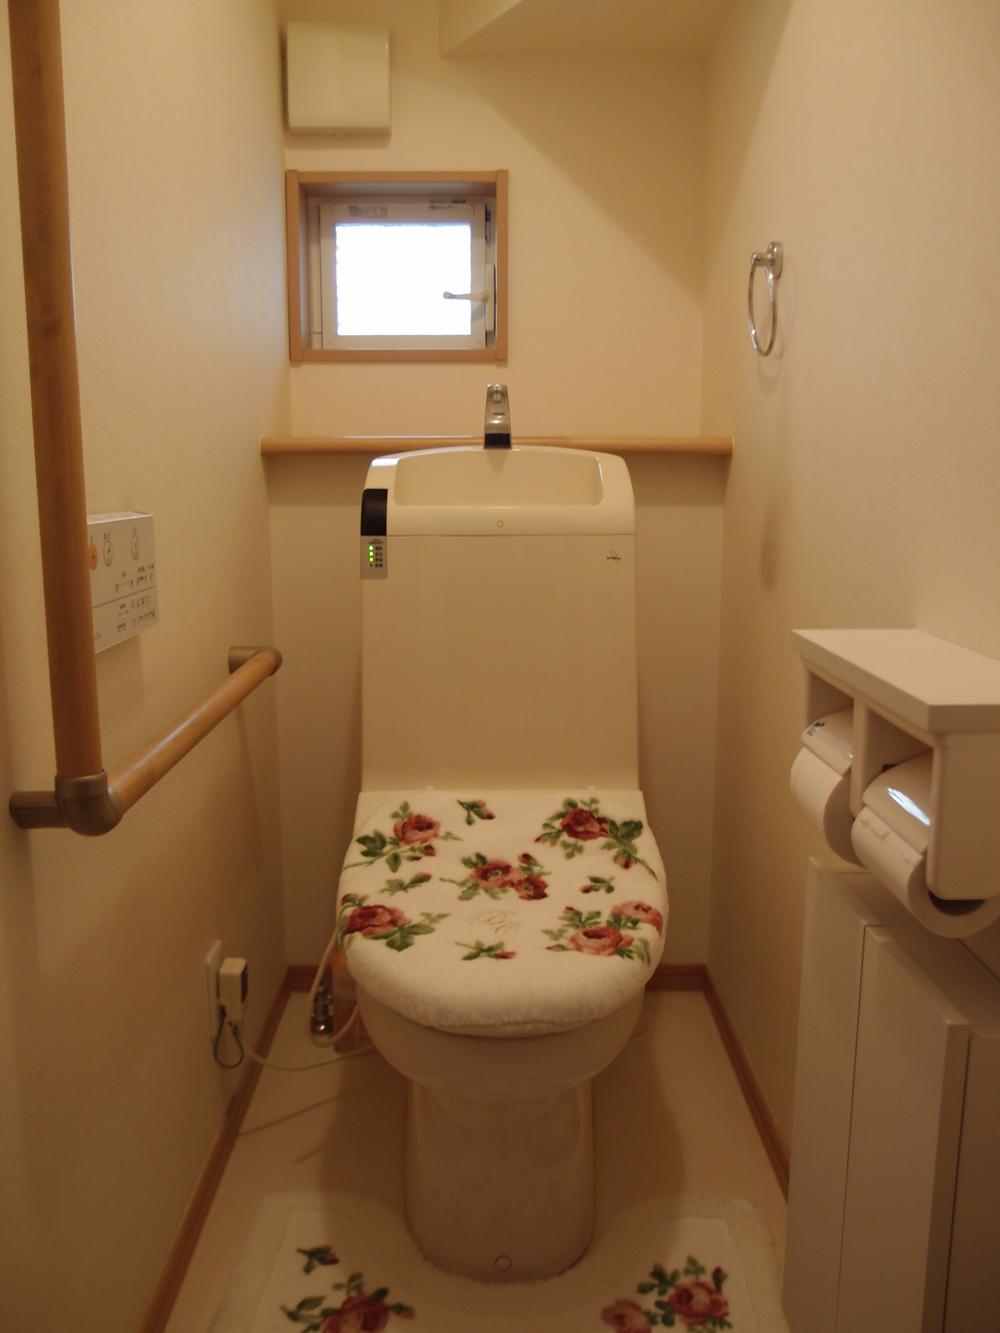 Toilet. First floor toilet facilities (warm water cleaning toilet seat)